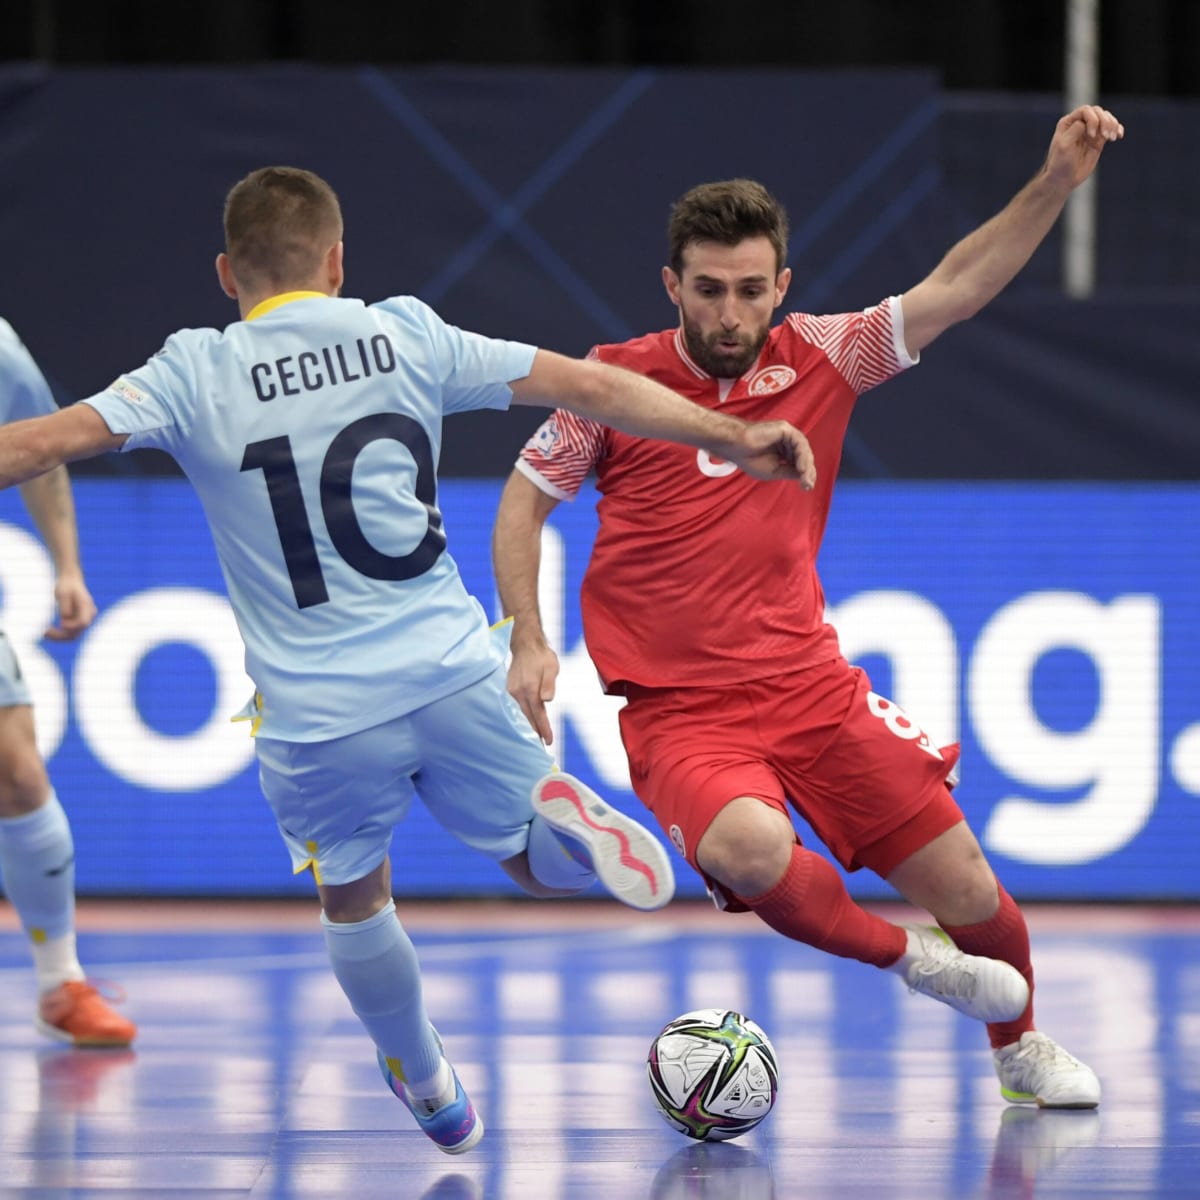 Futsal Euro 2022 Spain vs Slovakia Live Stream Watch Online, TV Channel, Start Time - How to Watch and Stream Major League and College Sports